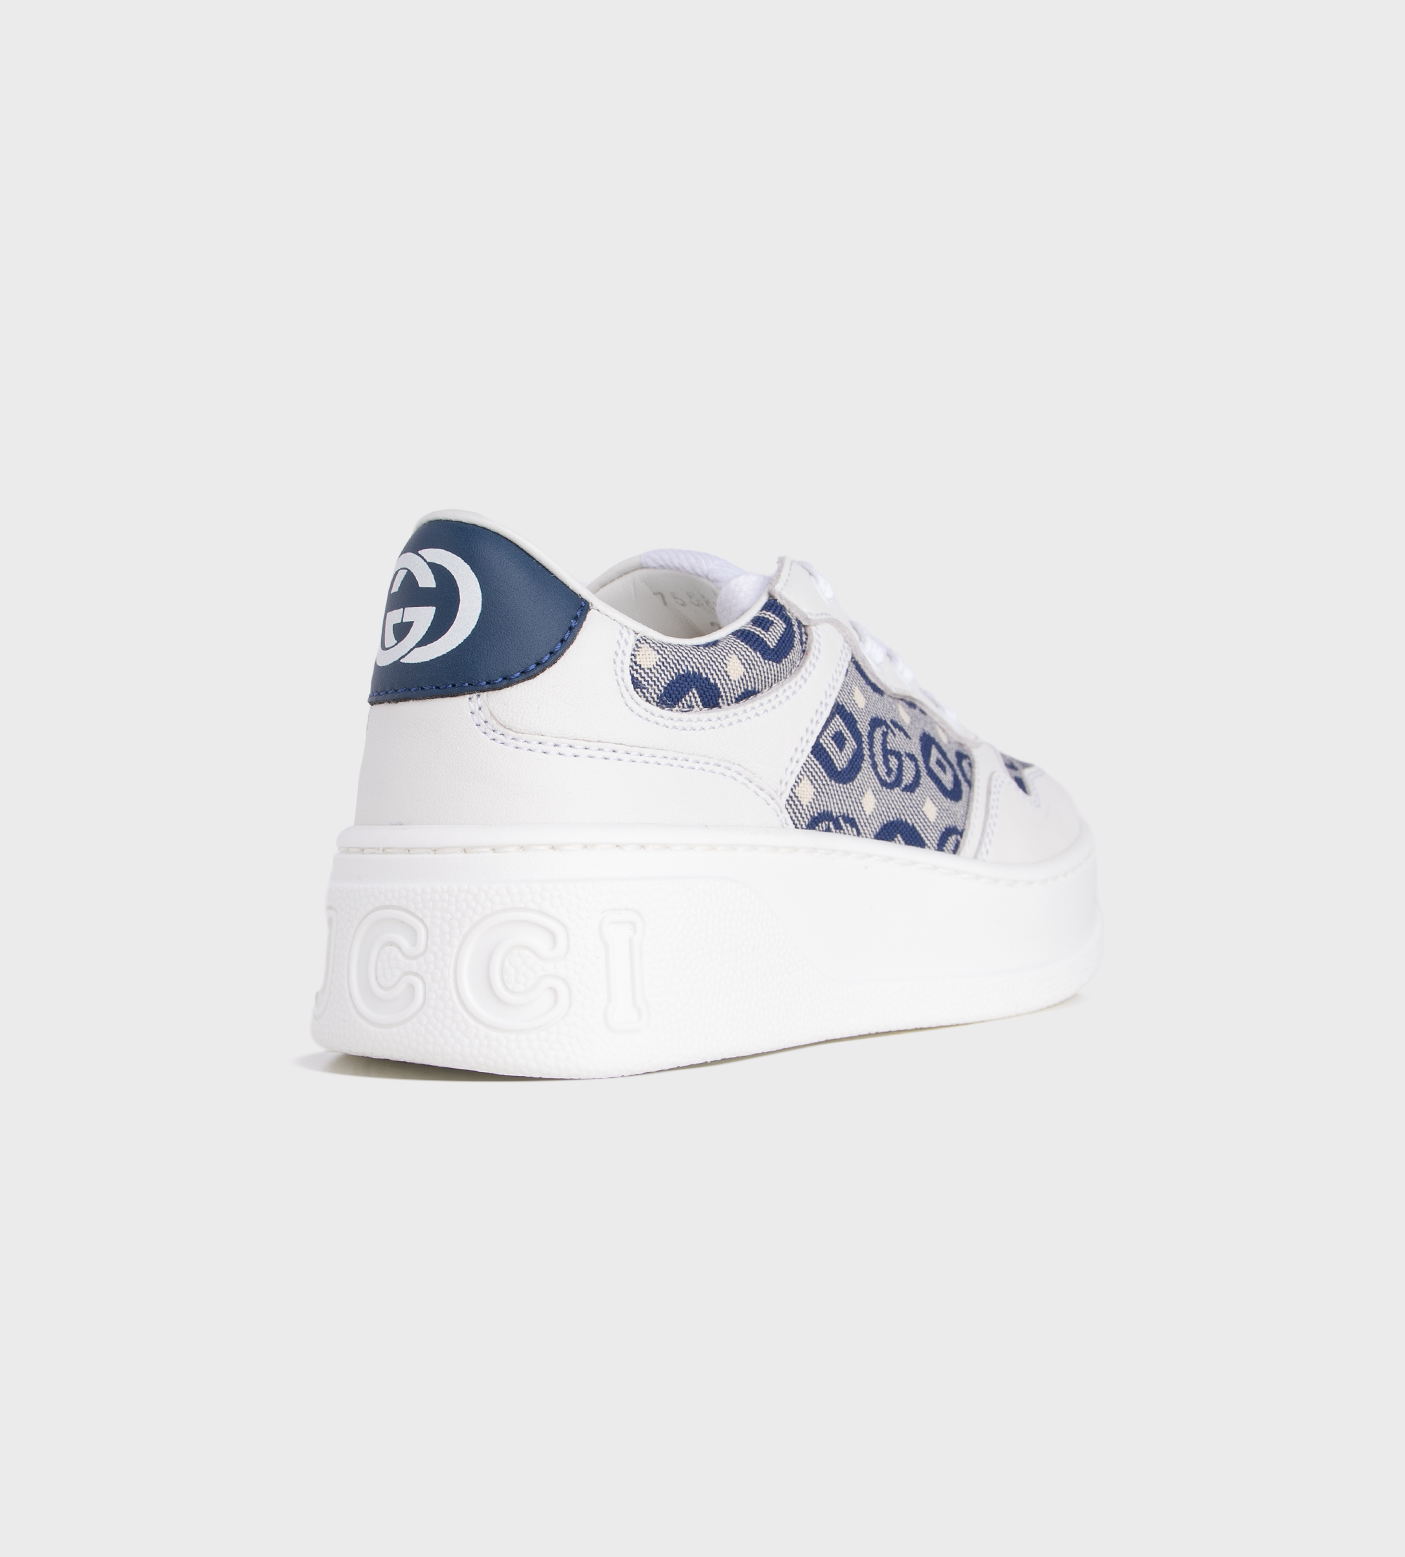 Double G Leather Platform Sneakers White Blue